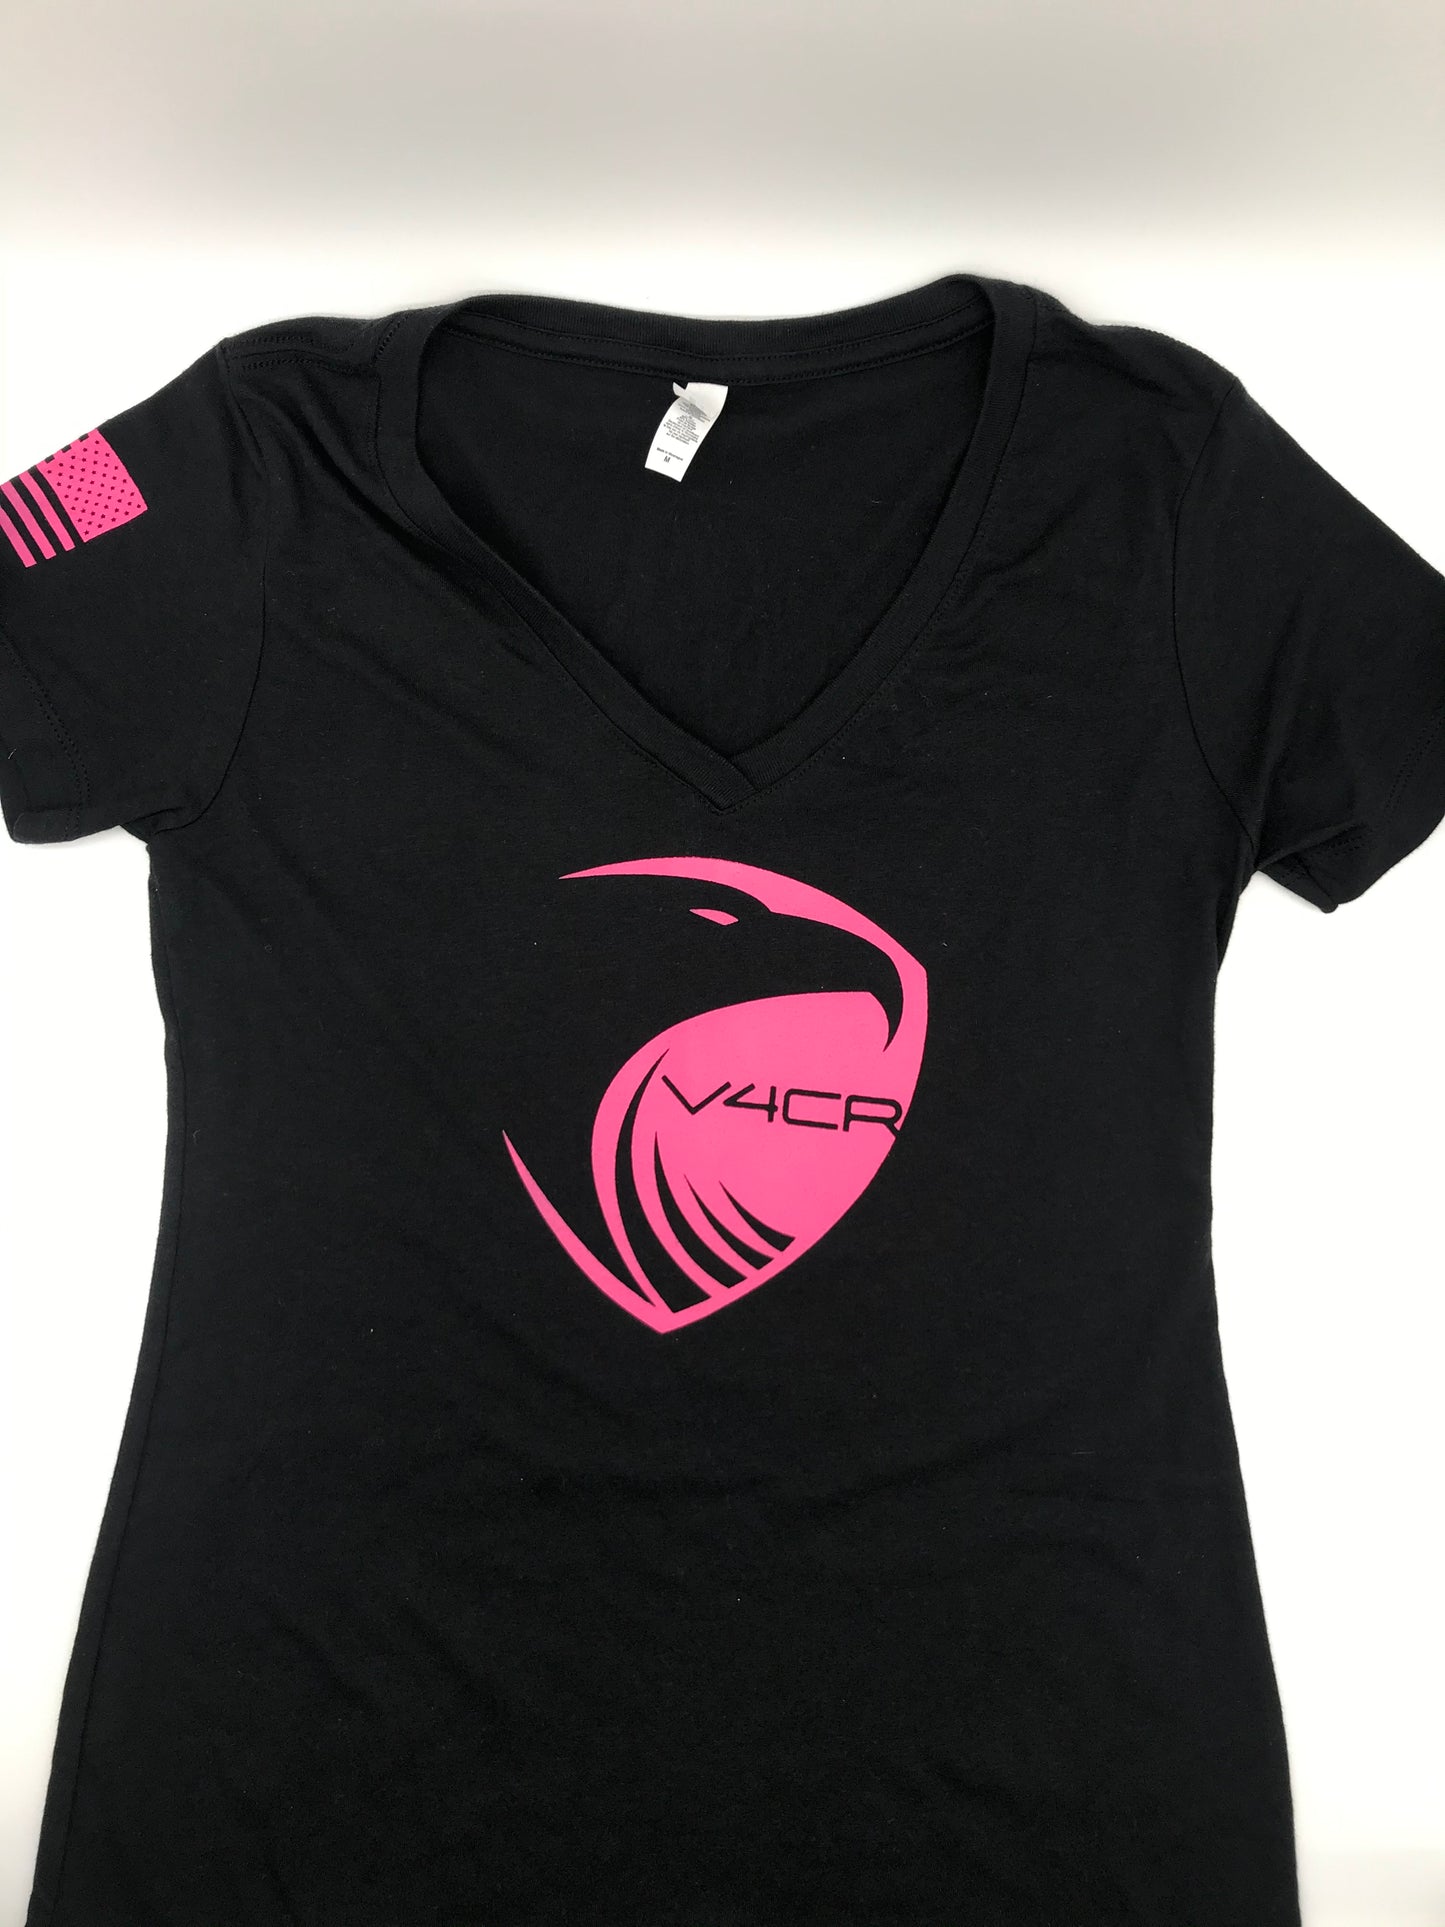 Women's Black w/Hot Pink V-Neck Fitted T-shirt